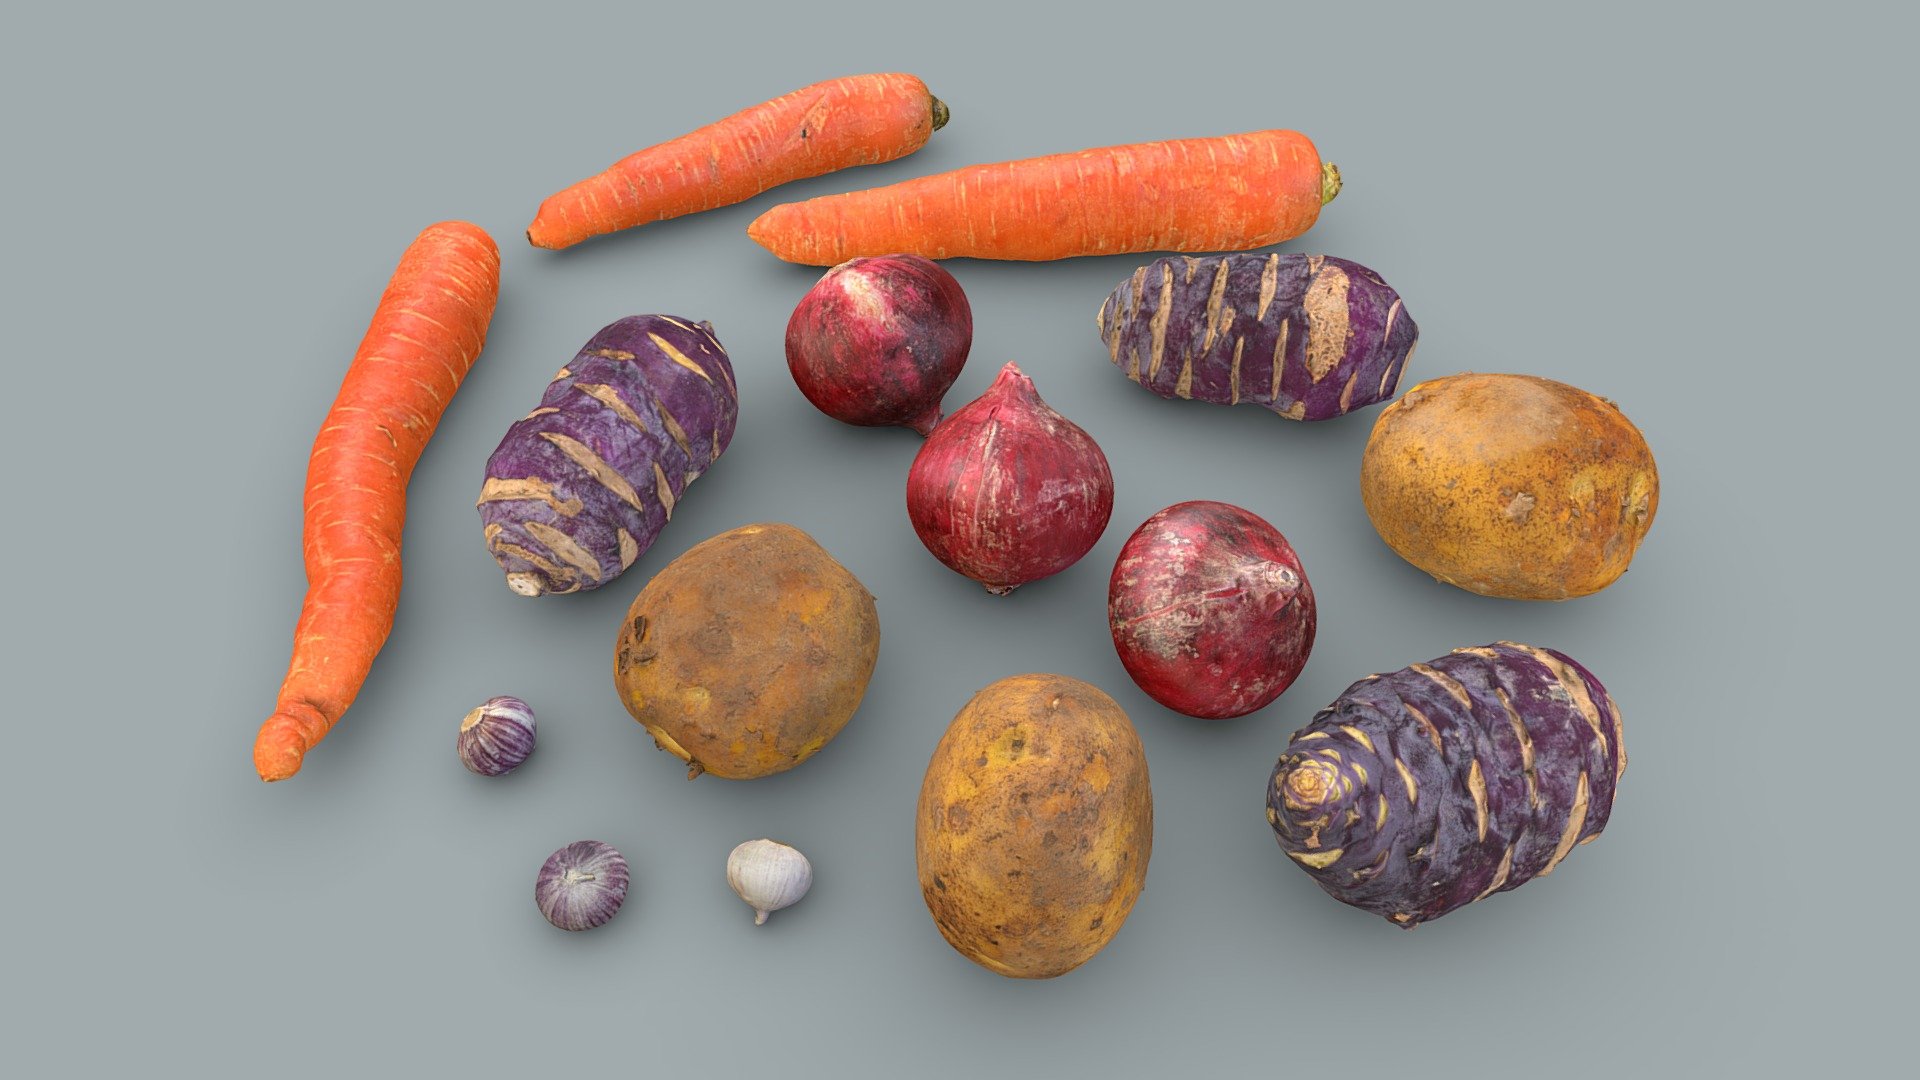 Lowpoly vegetable pack that includes:


3 individually scanned carrots
3 individually scanned potatoes
3 individually scanned kohlrabis
3 individually scanned solo garlics
3 individually scanned red onions

All models include 8k diffuse map, 4k normal map, 4k ambient occlusion map and various specular and gloss maps

Processed with Metashape + Blender + Instant meshes

You can also buy these vegetable packs separately from my store page 3d model